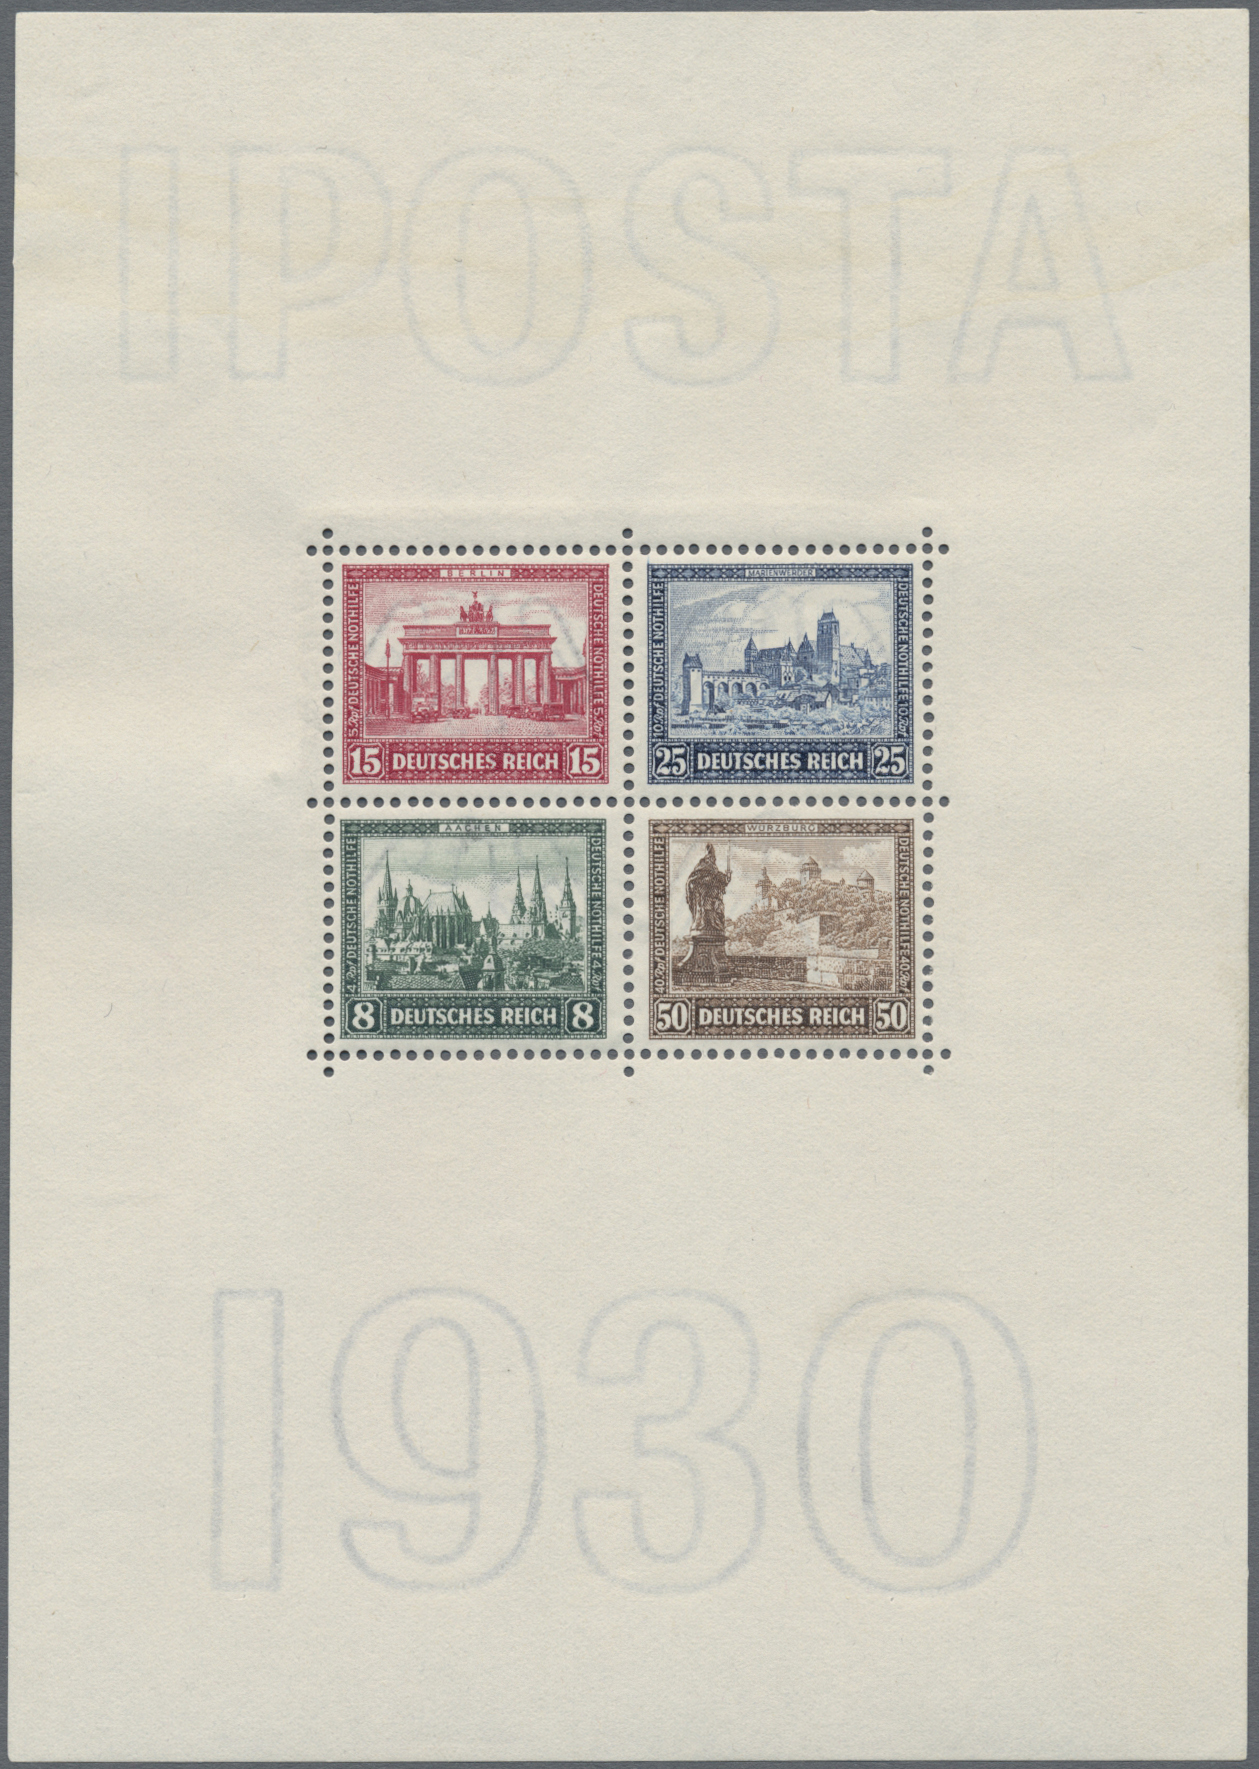 Lot 36431 - Deutsches Reich  -  Auktionshaus Christoph Gärtner GmbH & Co. KG Sale #44 Collections Germany